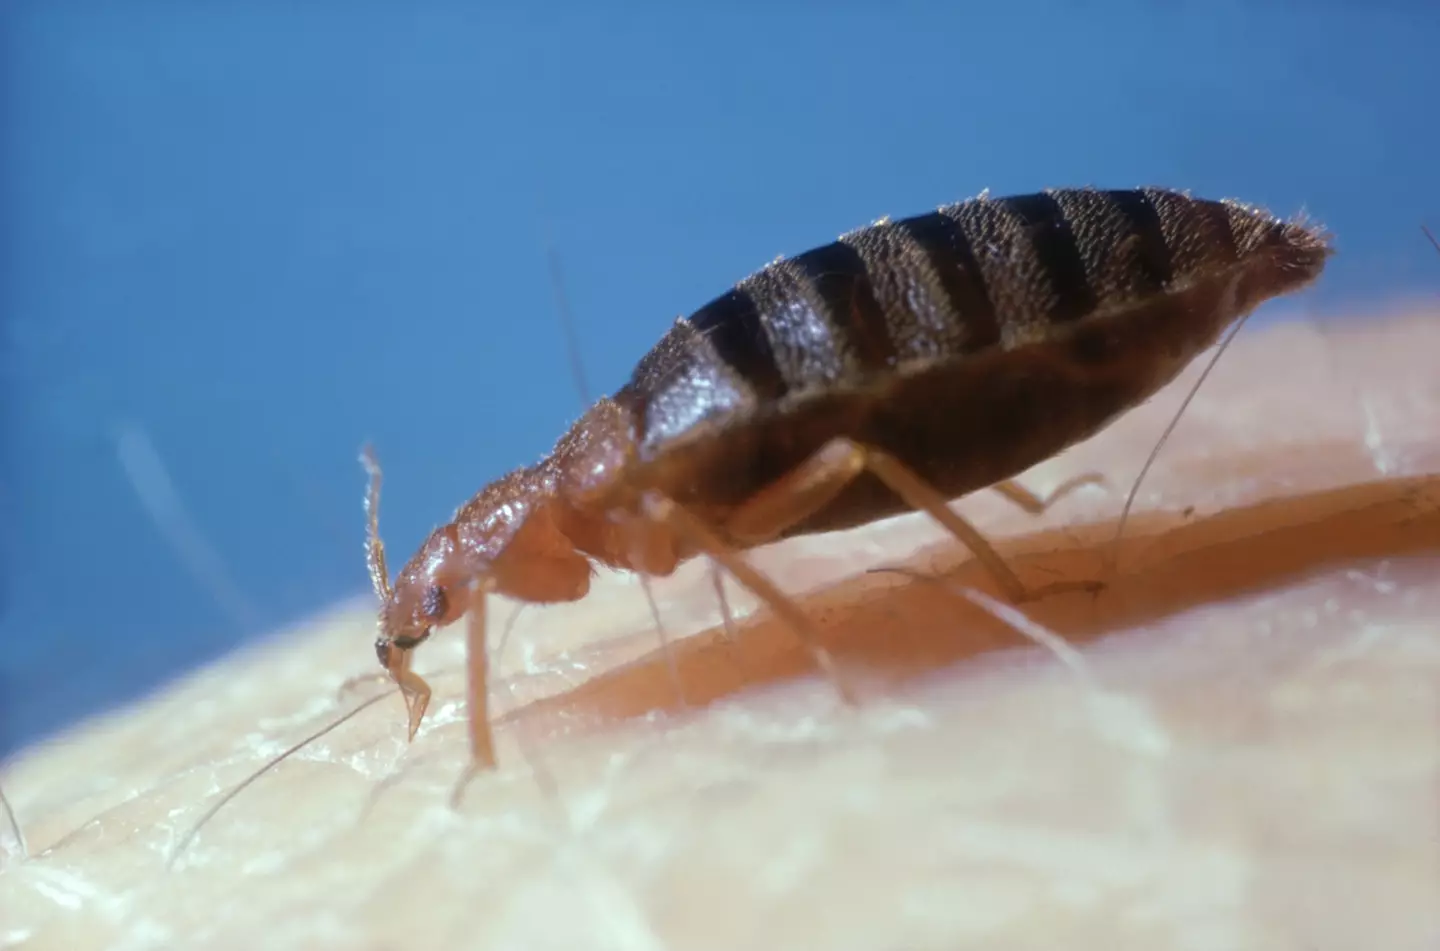 Bed bugs are notoriously difficult to get rid of.